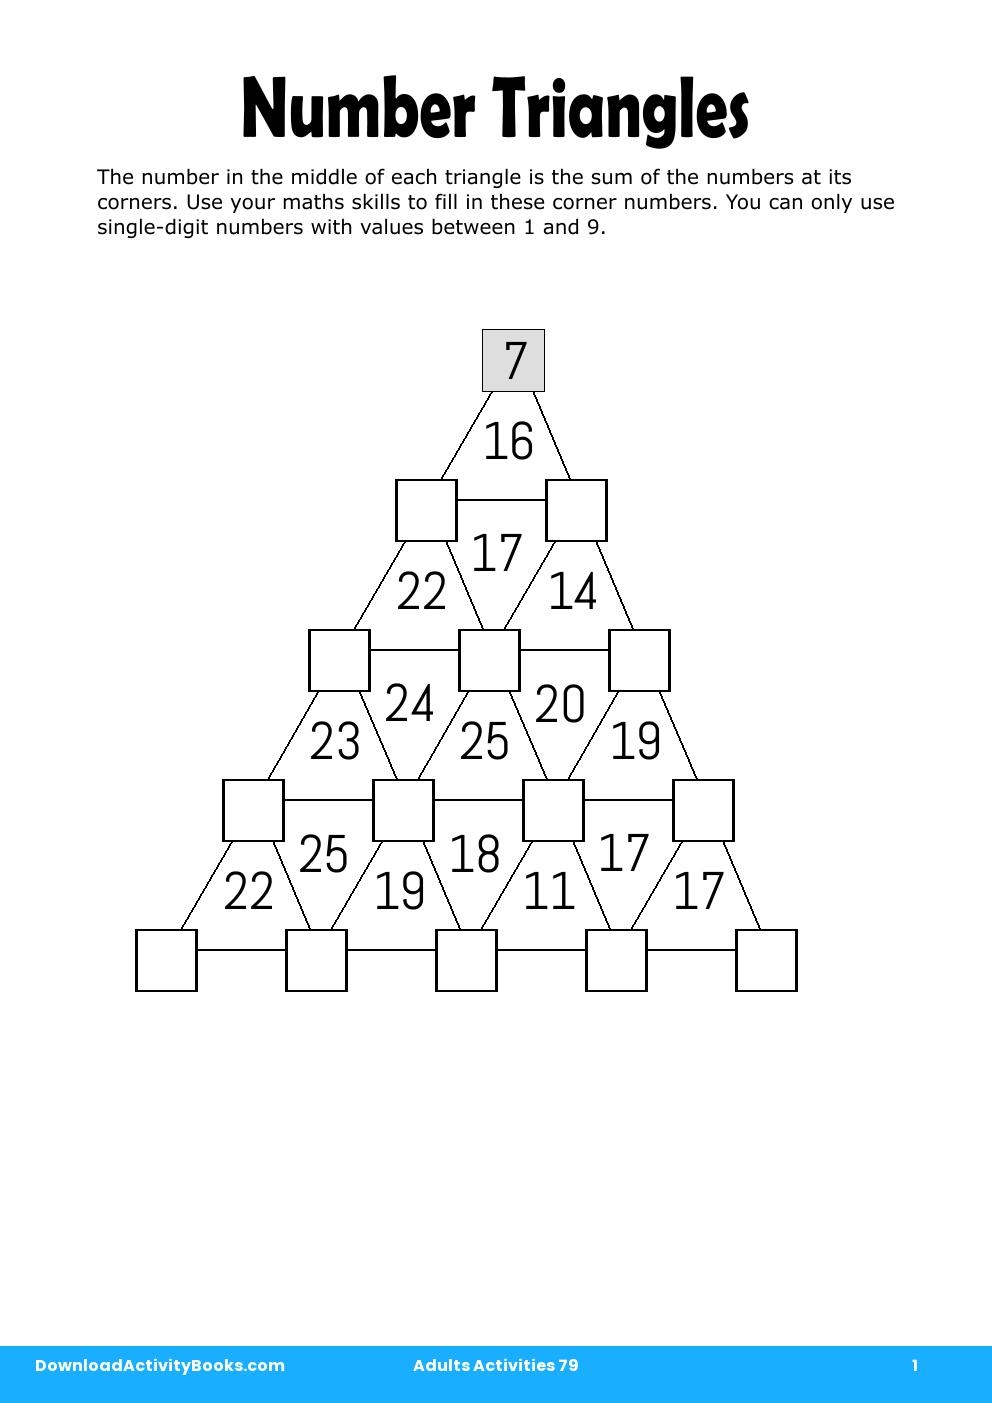 Number Triangles in Adults Activities 79